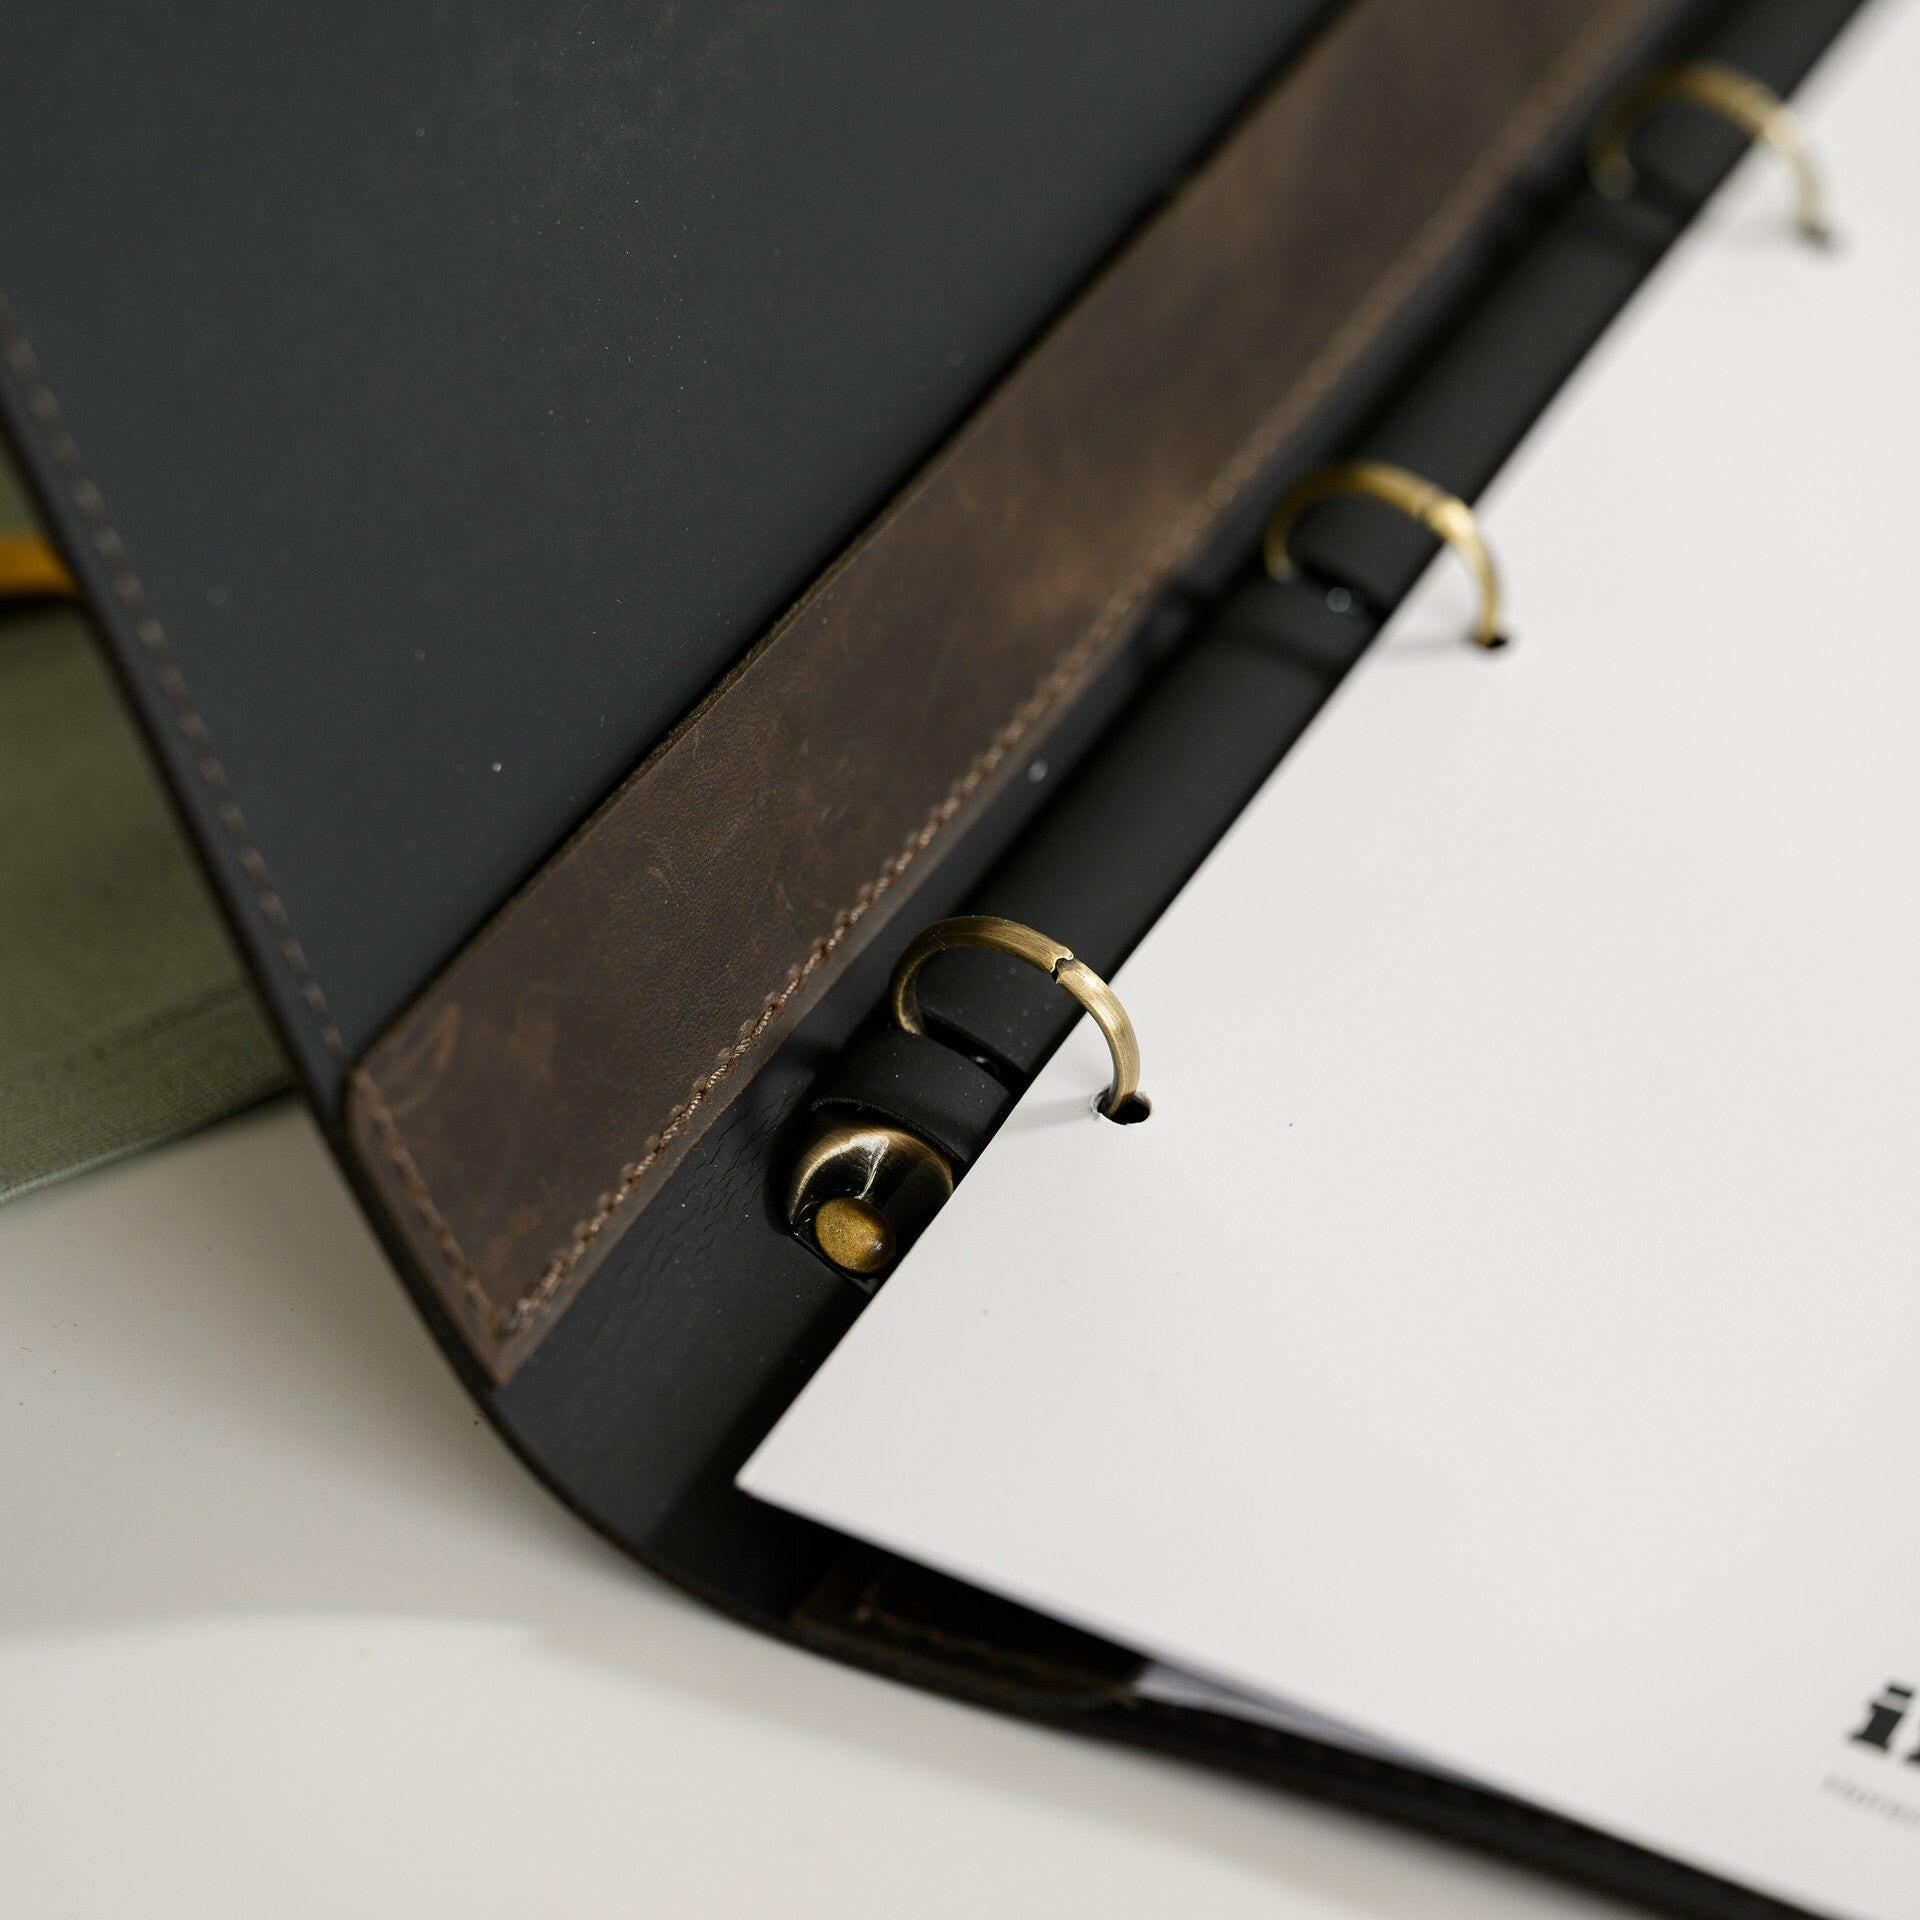 Showcase your menus with our leather holder designed for legal-sized sheets.